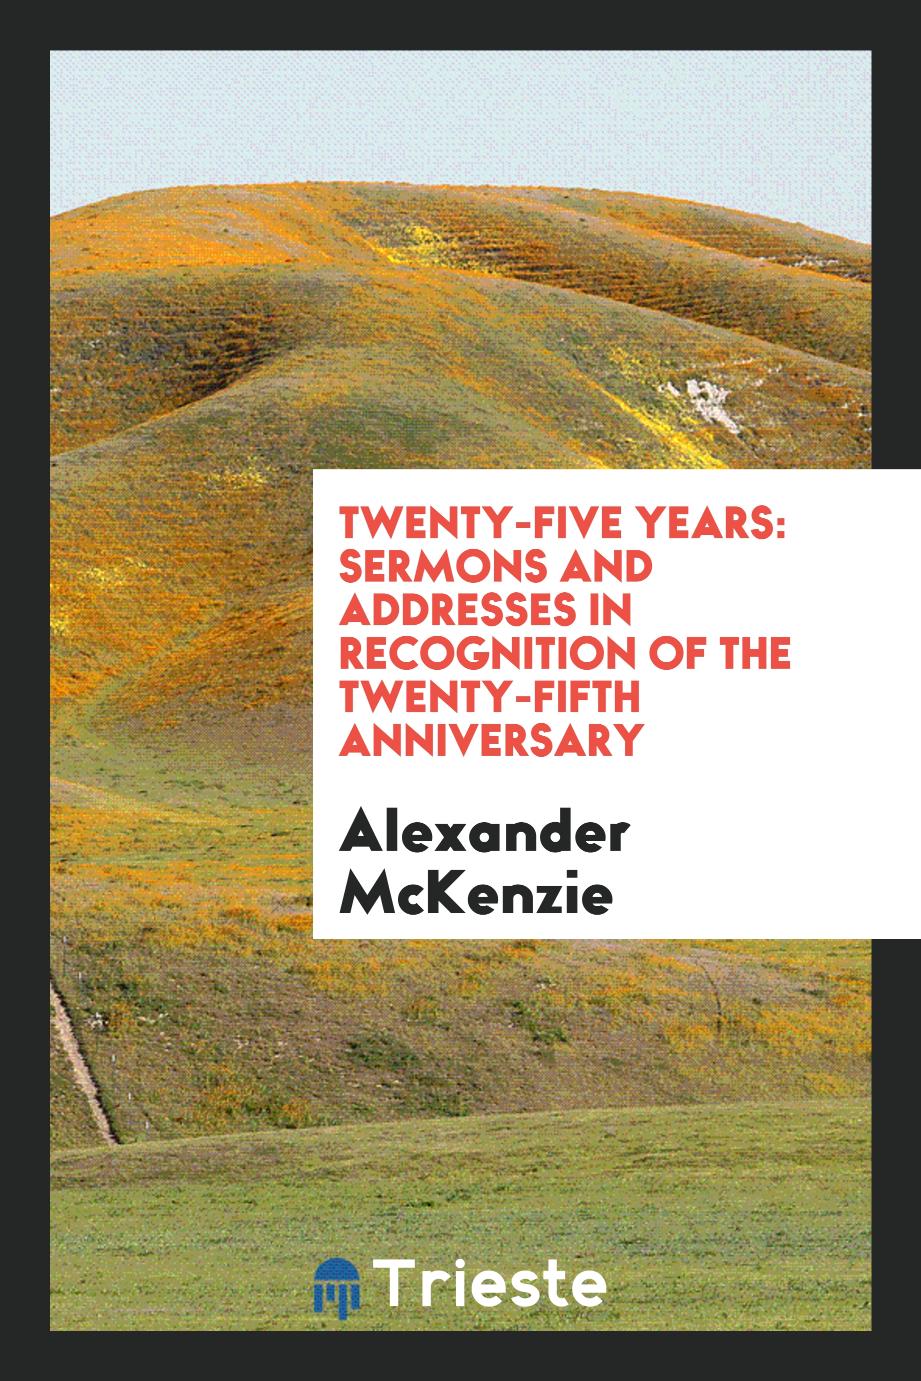 Twenty-five Years: Sermons and Addresses in Recognition of the Twenty-fifth Anniversary